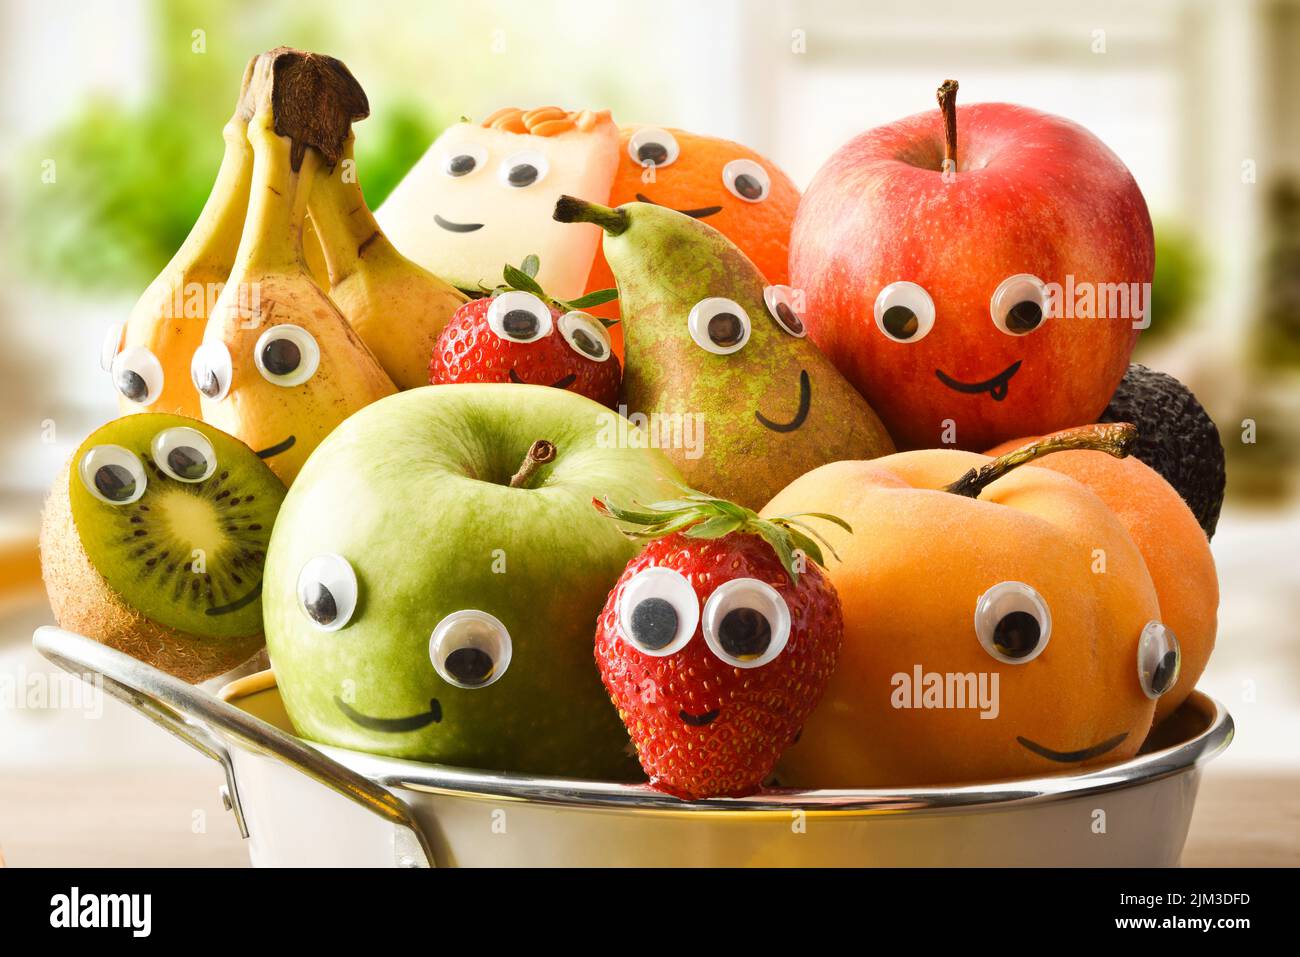 Detail of a fruit bowl full of fruit with eyes and a mouth on the bench in a bright kitchen. Fruits and vegetables child healthy eating concept. Stock Photo